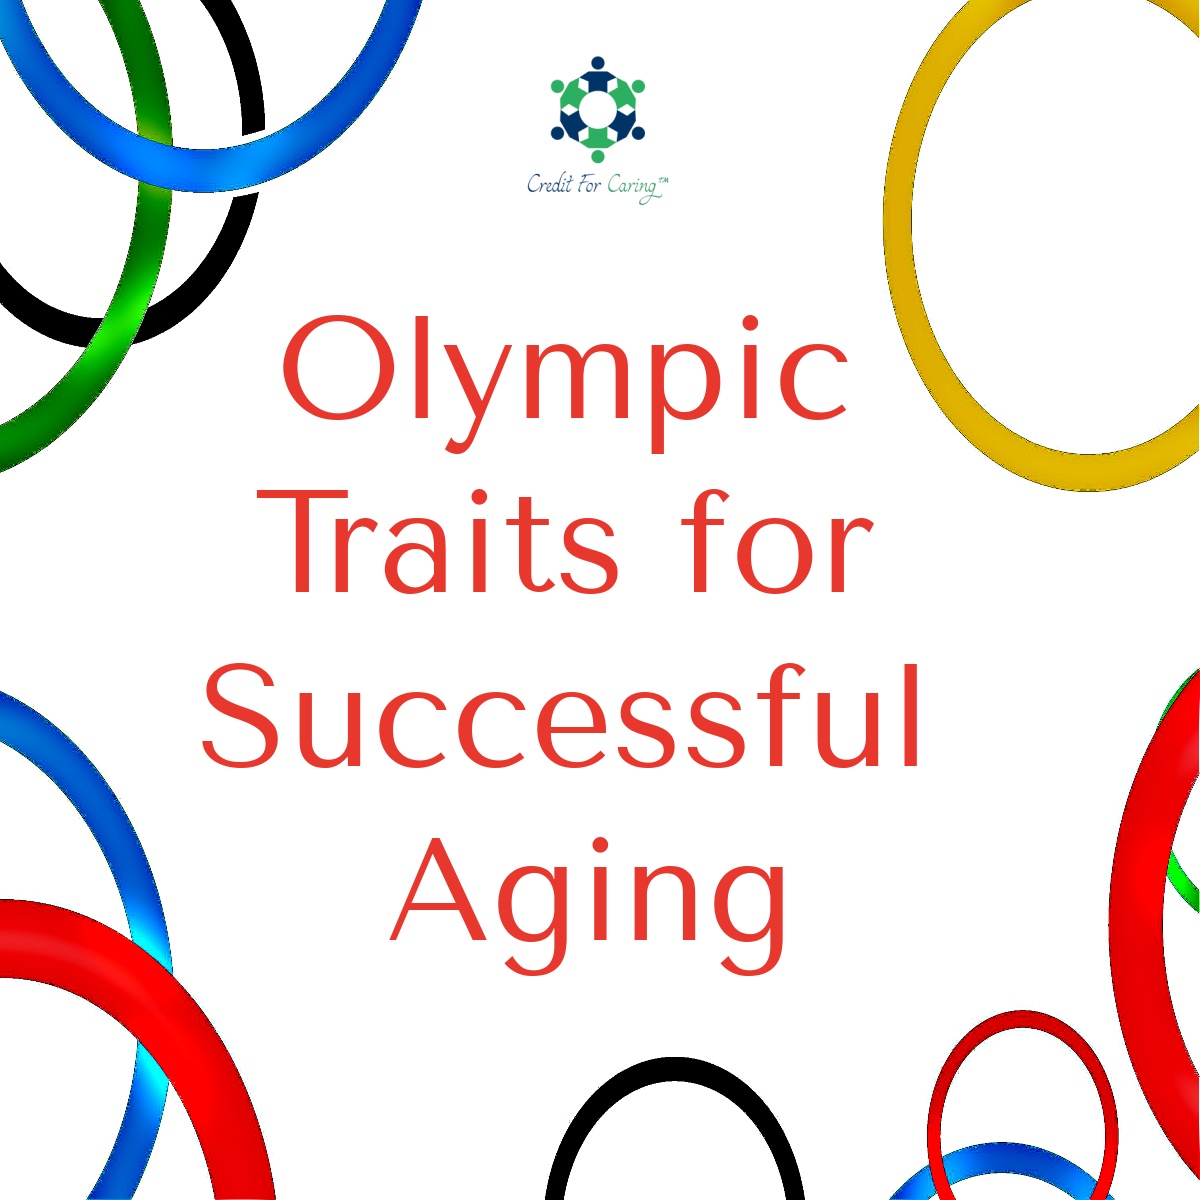 Aging Like an Olympian: Lessons in Discipline and Perseverance from Paris 2024